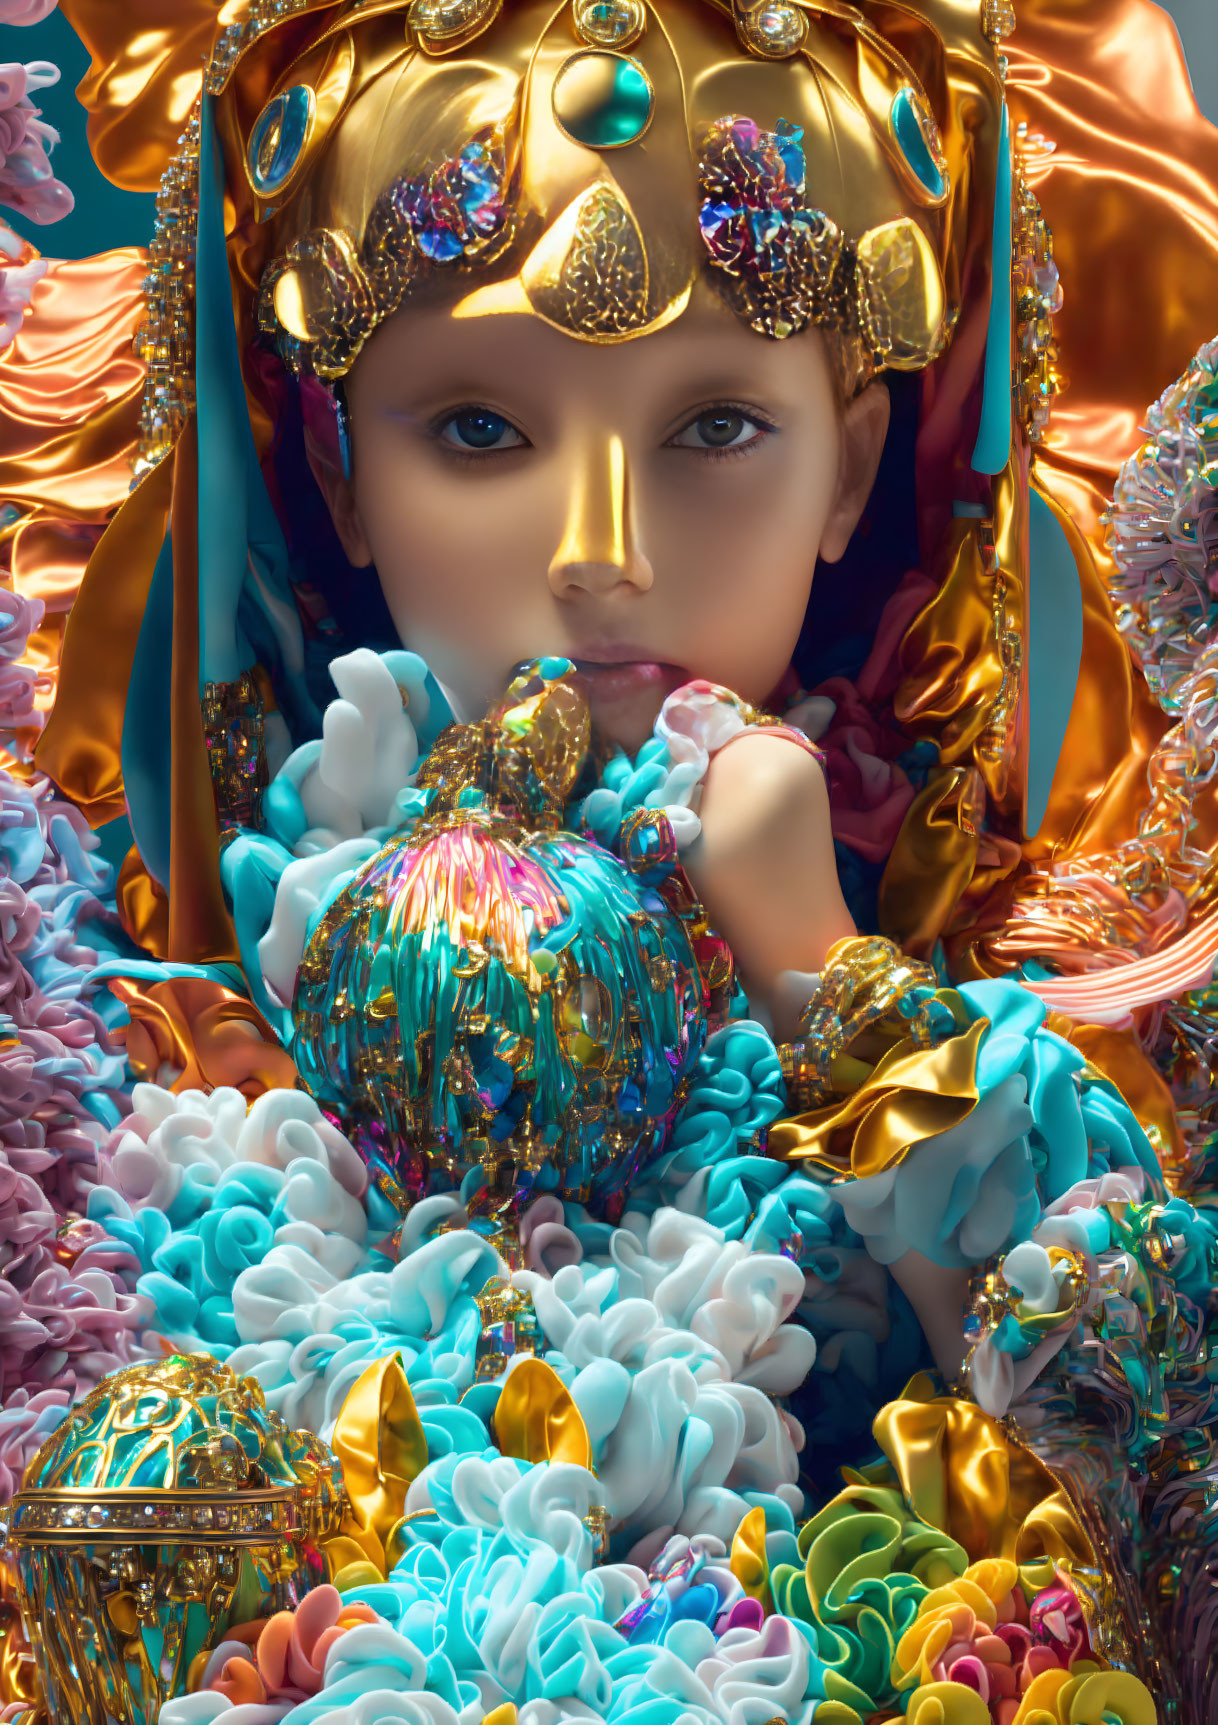 Vivid high-resolution image of figure in golden headdress and ornate robes surrounded by colorful floral textures